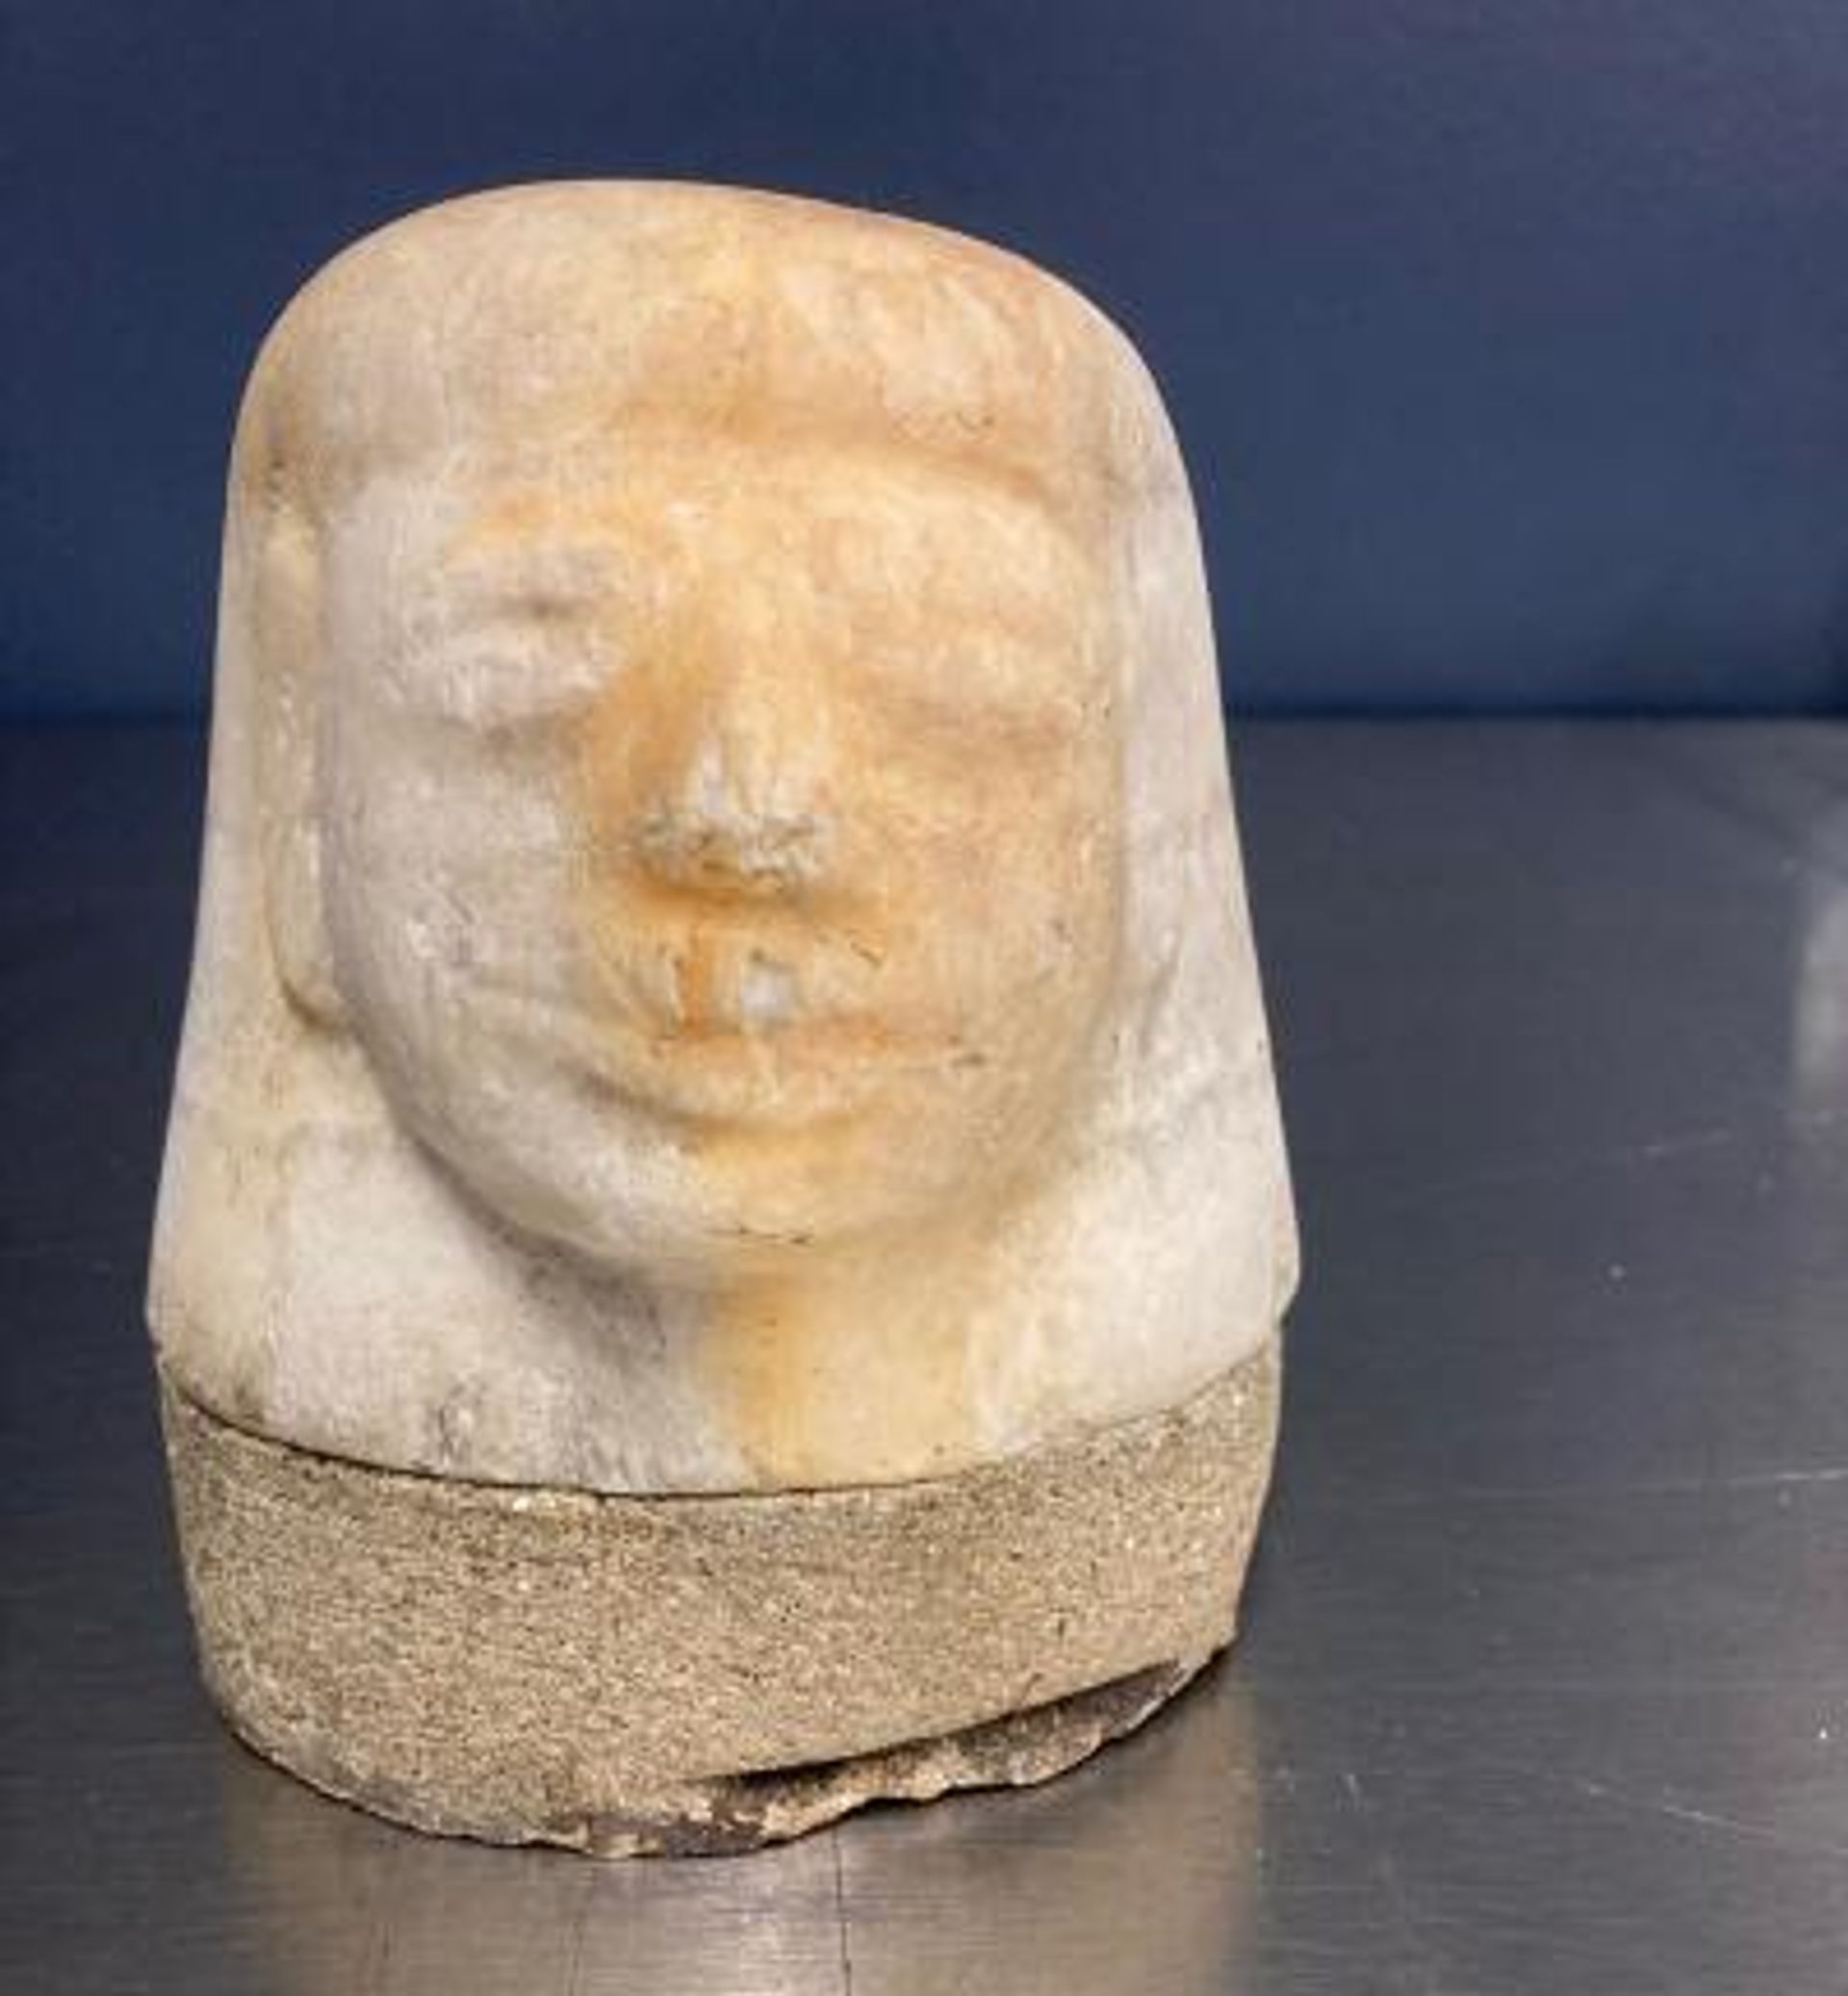 The ancient Egyptian canopic jar lid seized by authorities earlier this month. Courtesy US Customs and Border Protection. 